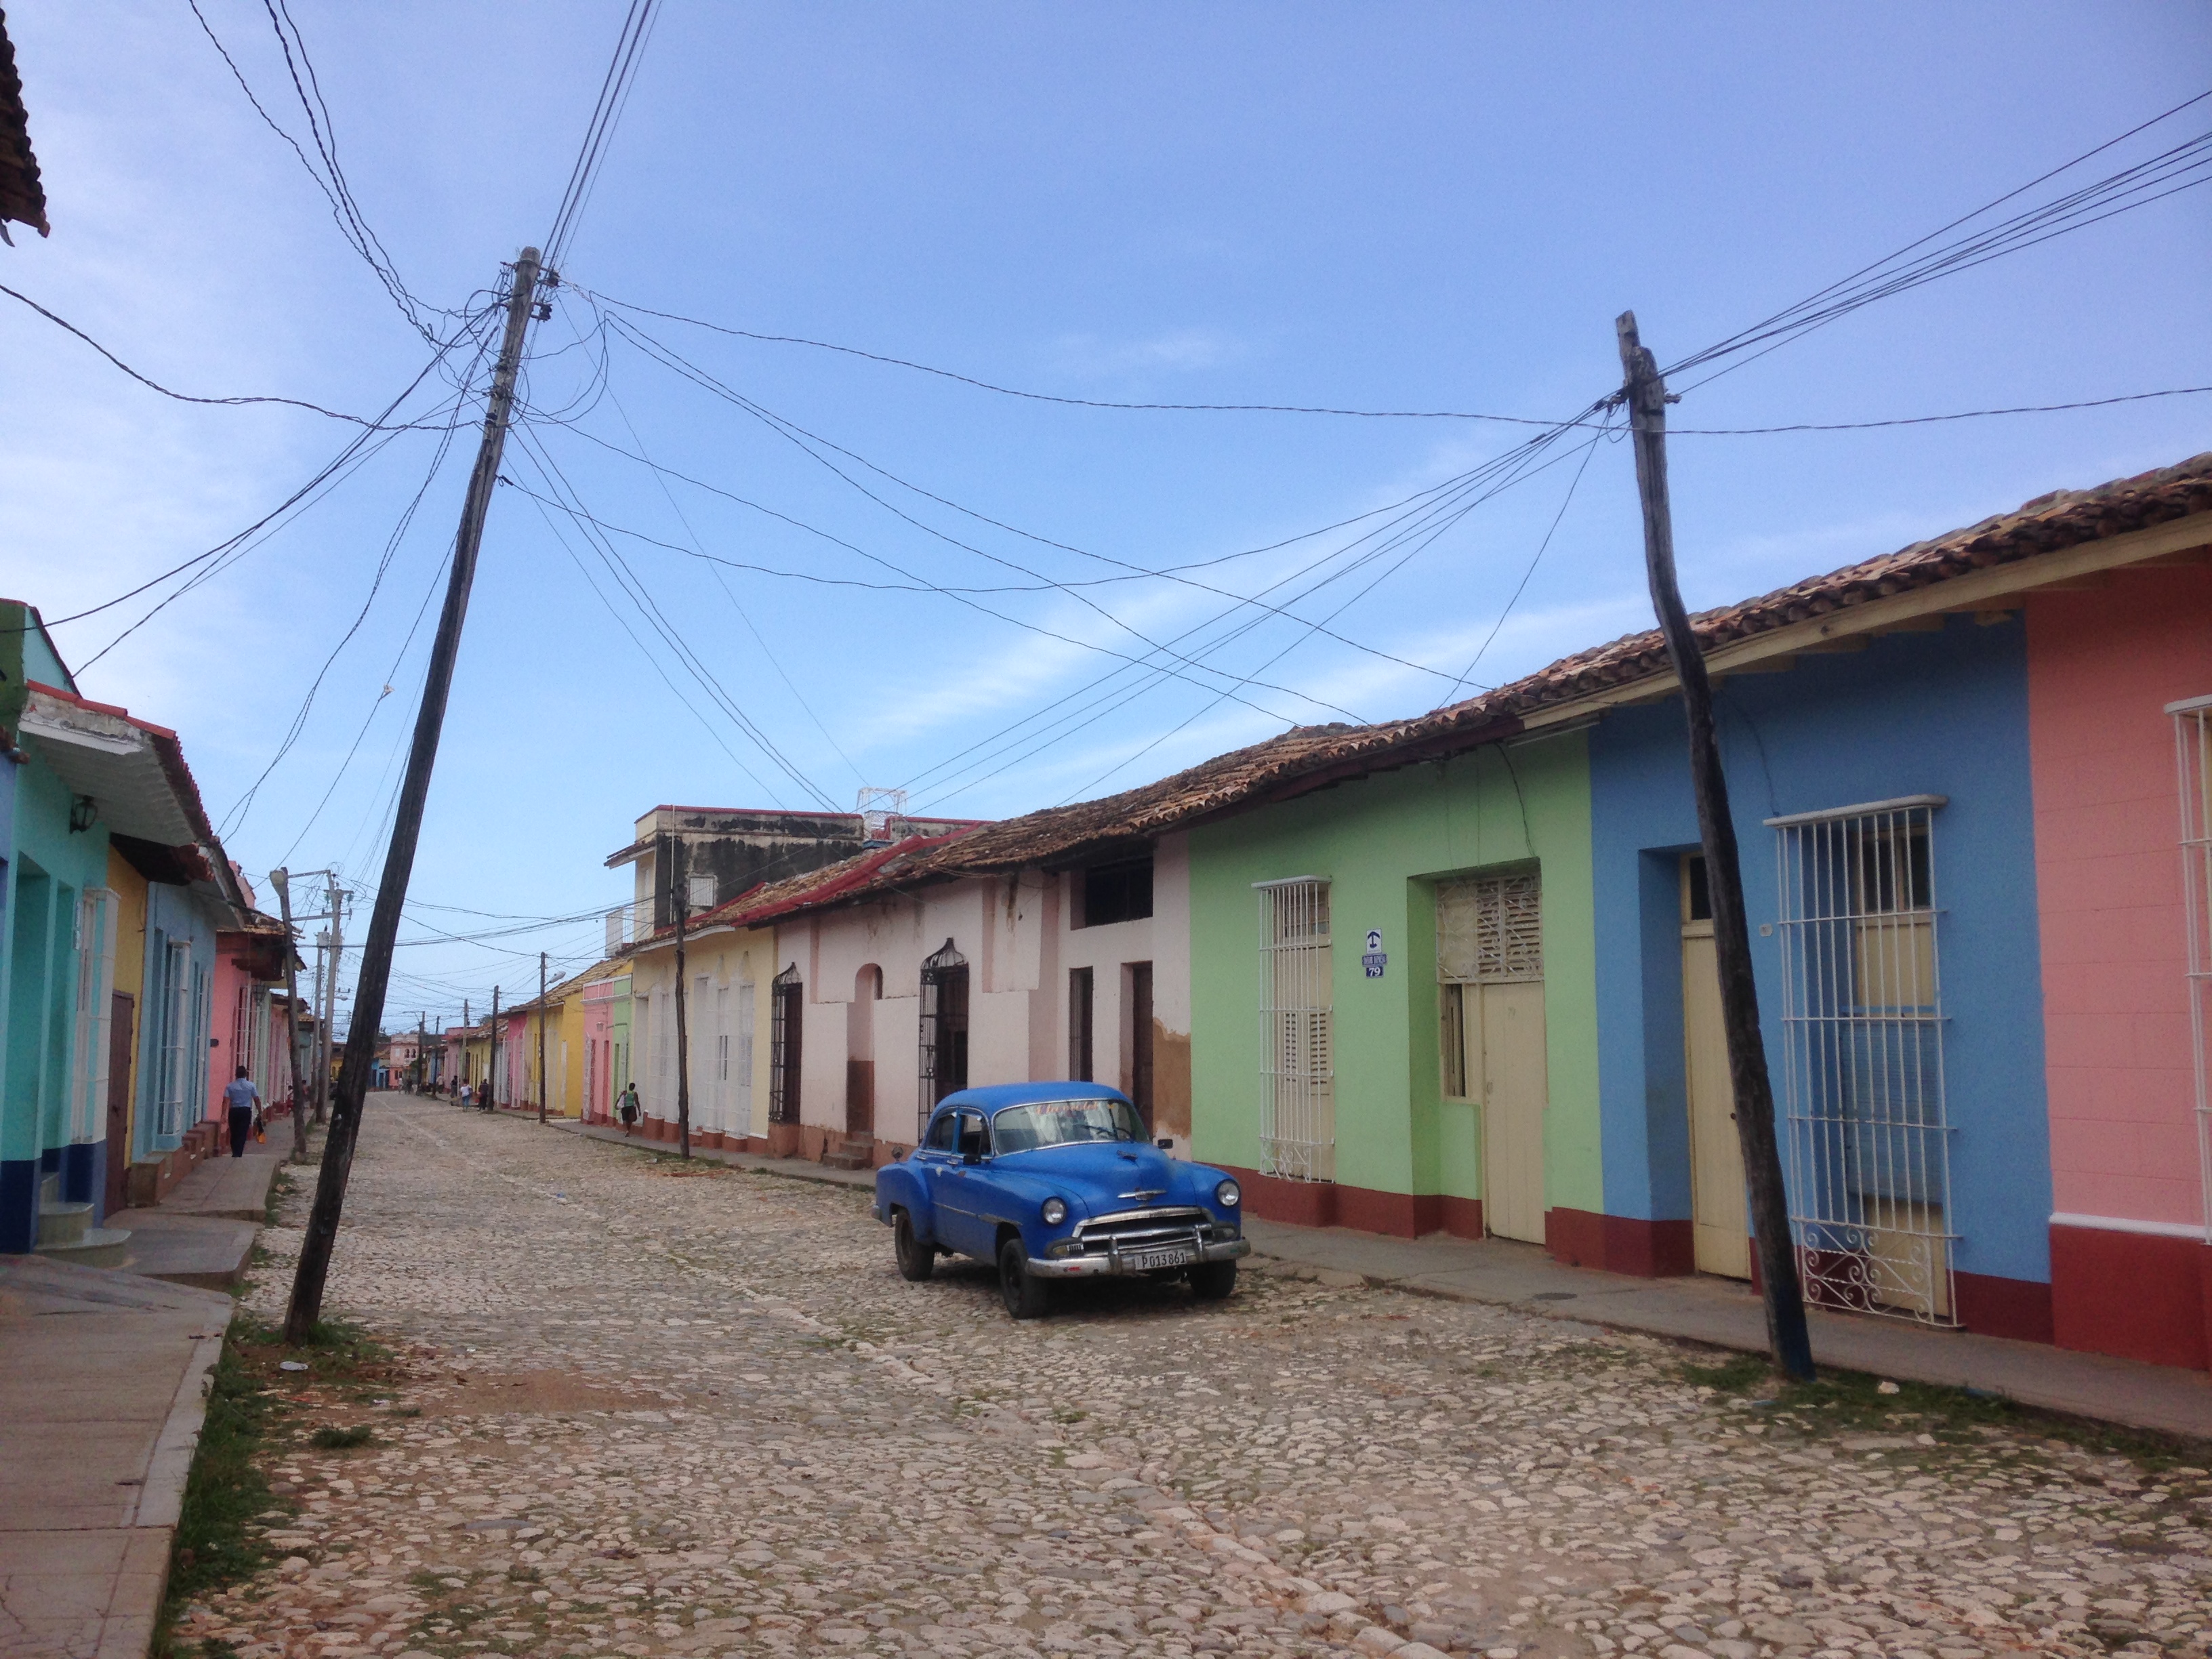 Cuba: Walking the path between myth and reality